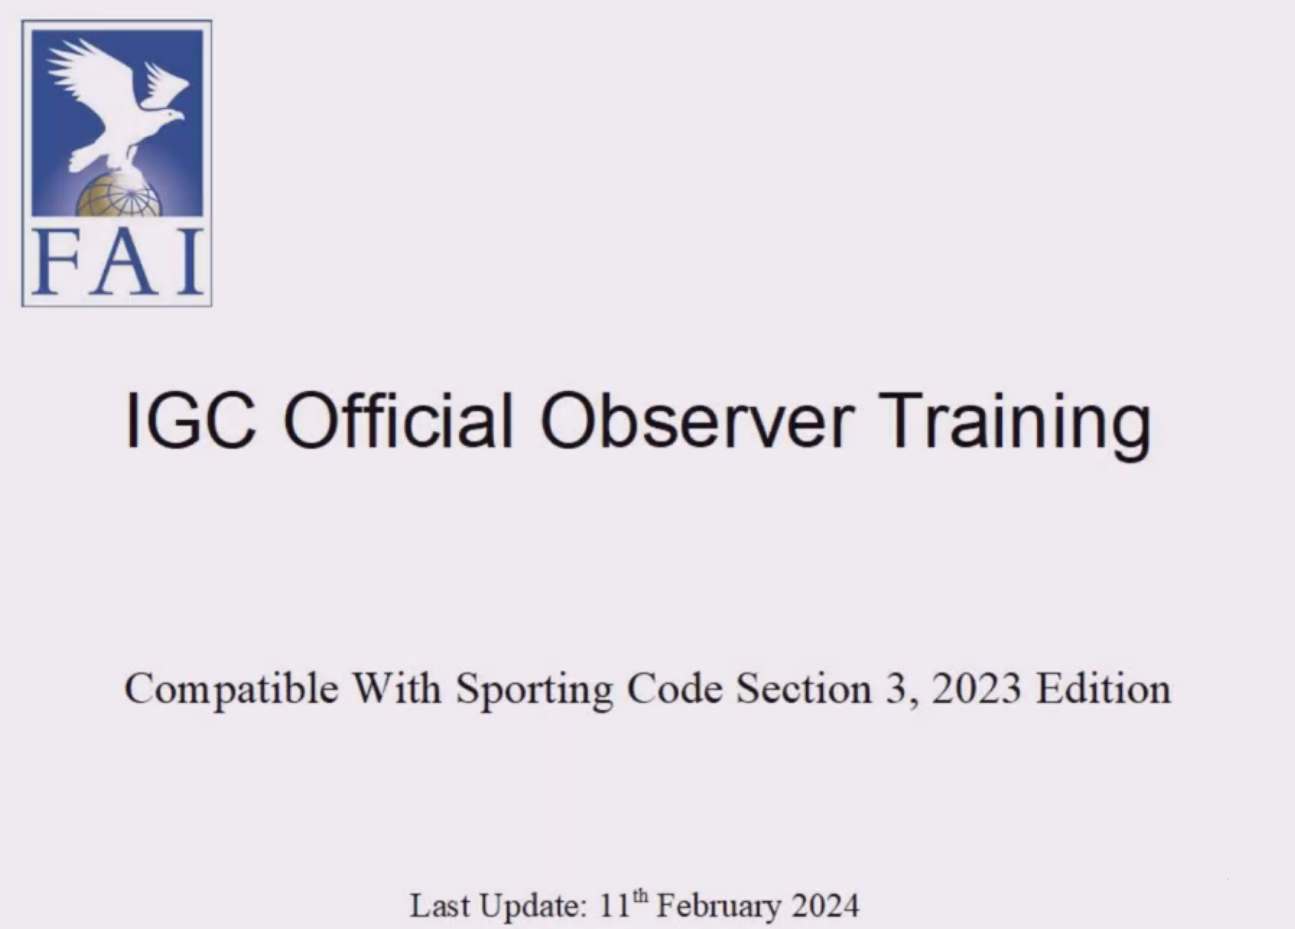 IGC Official Observer Training 2023 edition